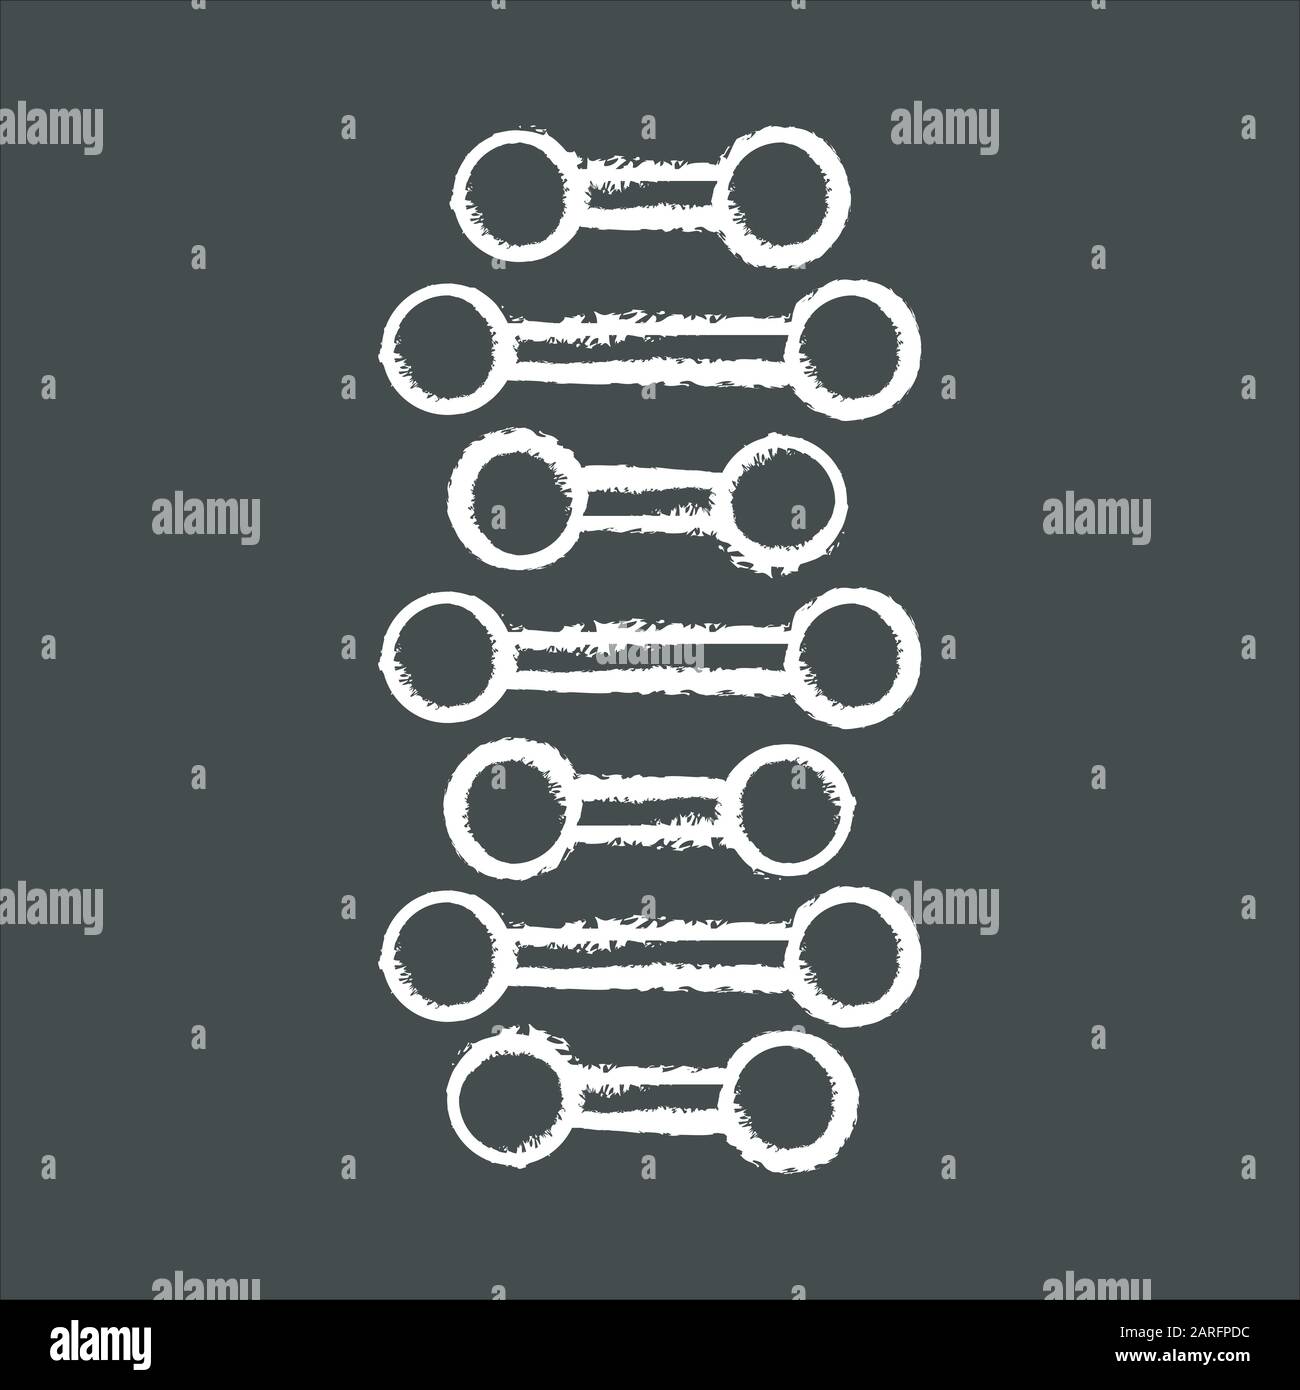 DNA spiral chains chalk icon. Connected dots, lines. Deoxyribonucleic, nucleic acid helix. Spiral strand. Chromosome. Molecular biology. Genetic code. Stock Vector